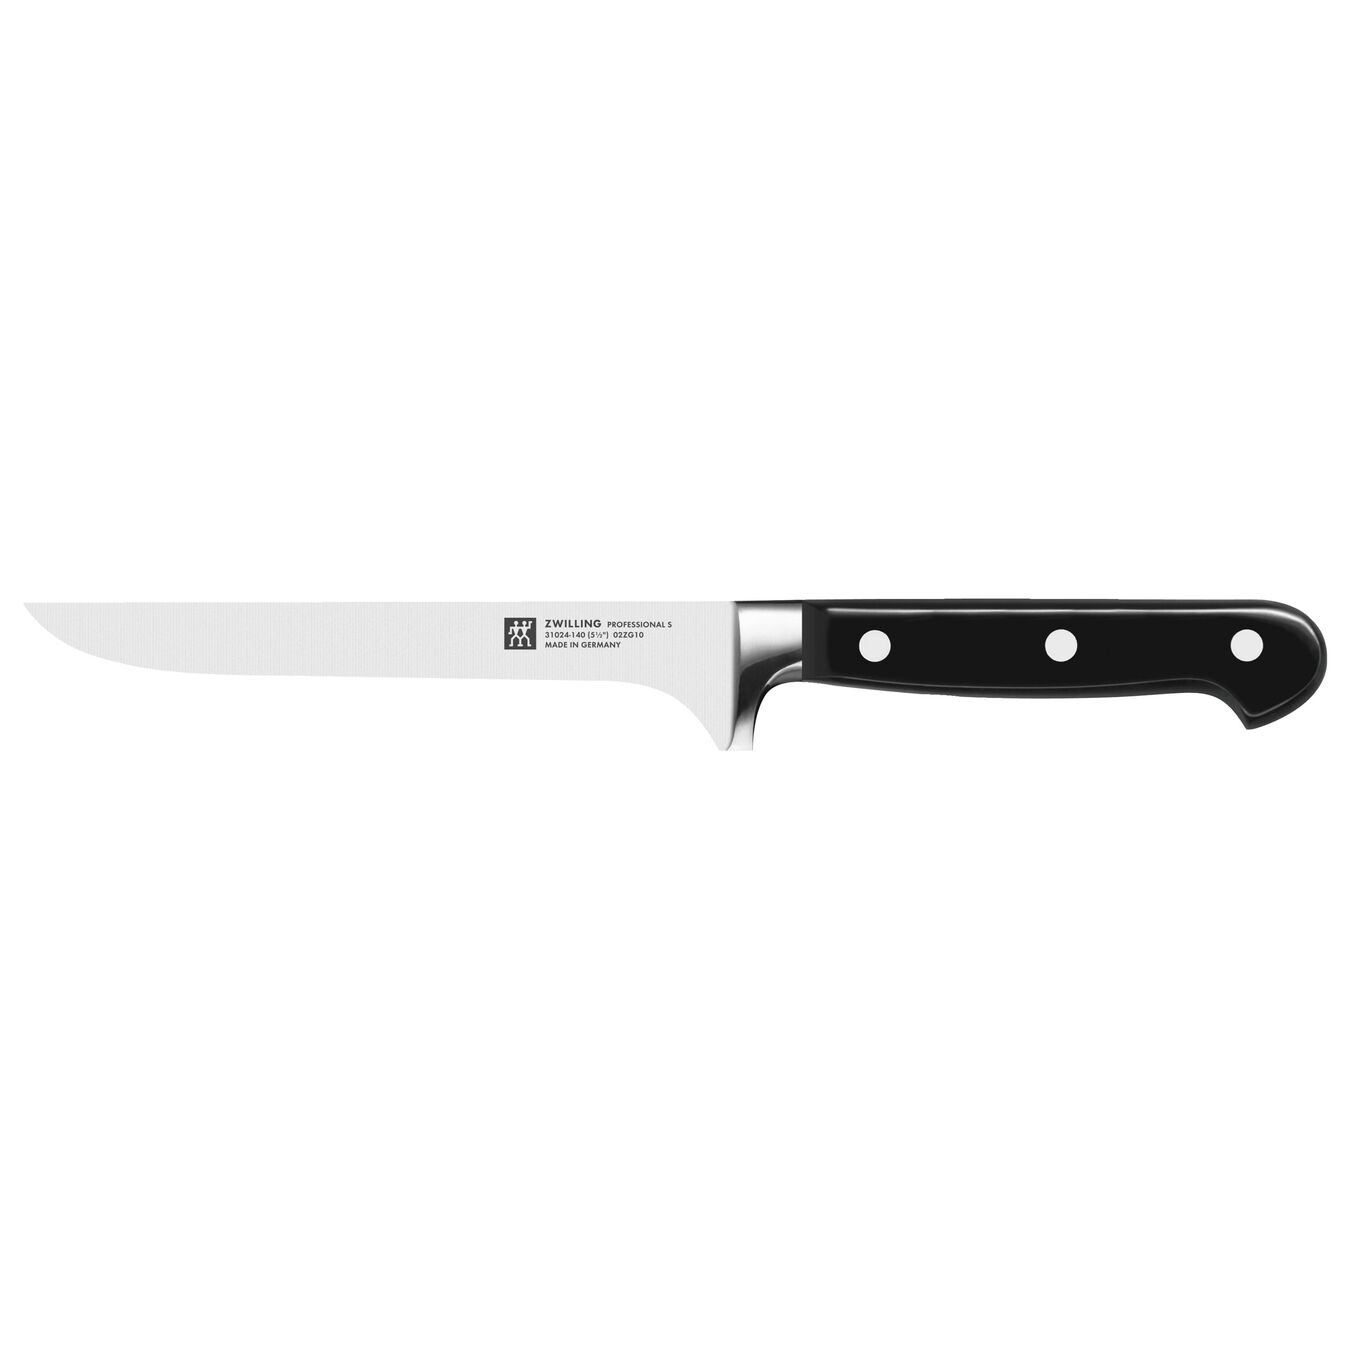 5.5 inch Boning knife - Visual Imperfections,,large 1